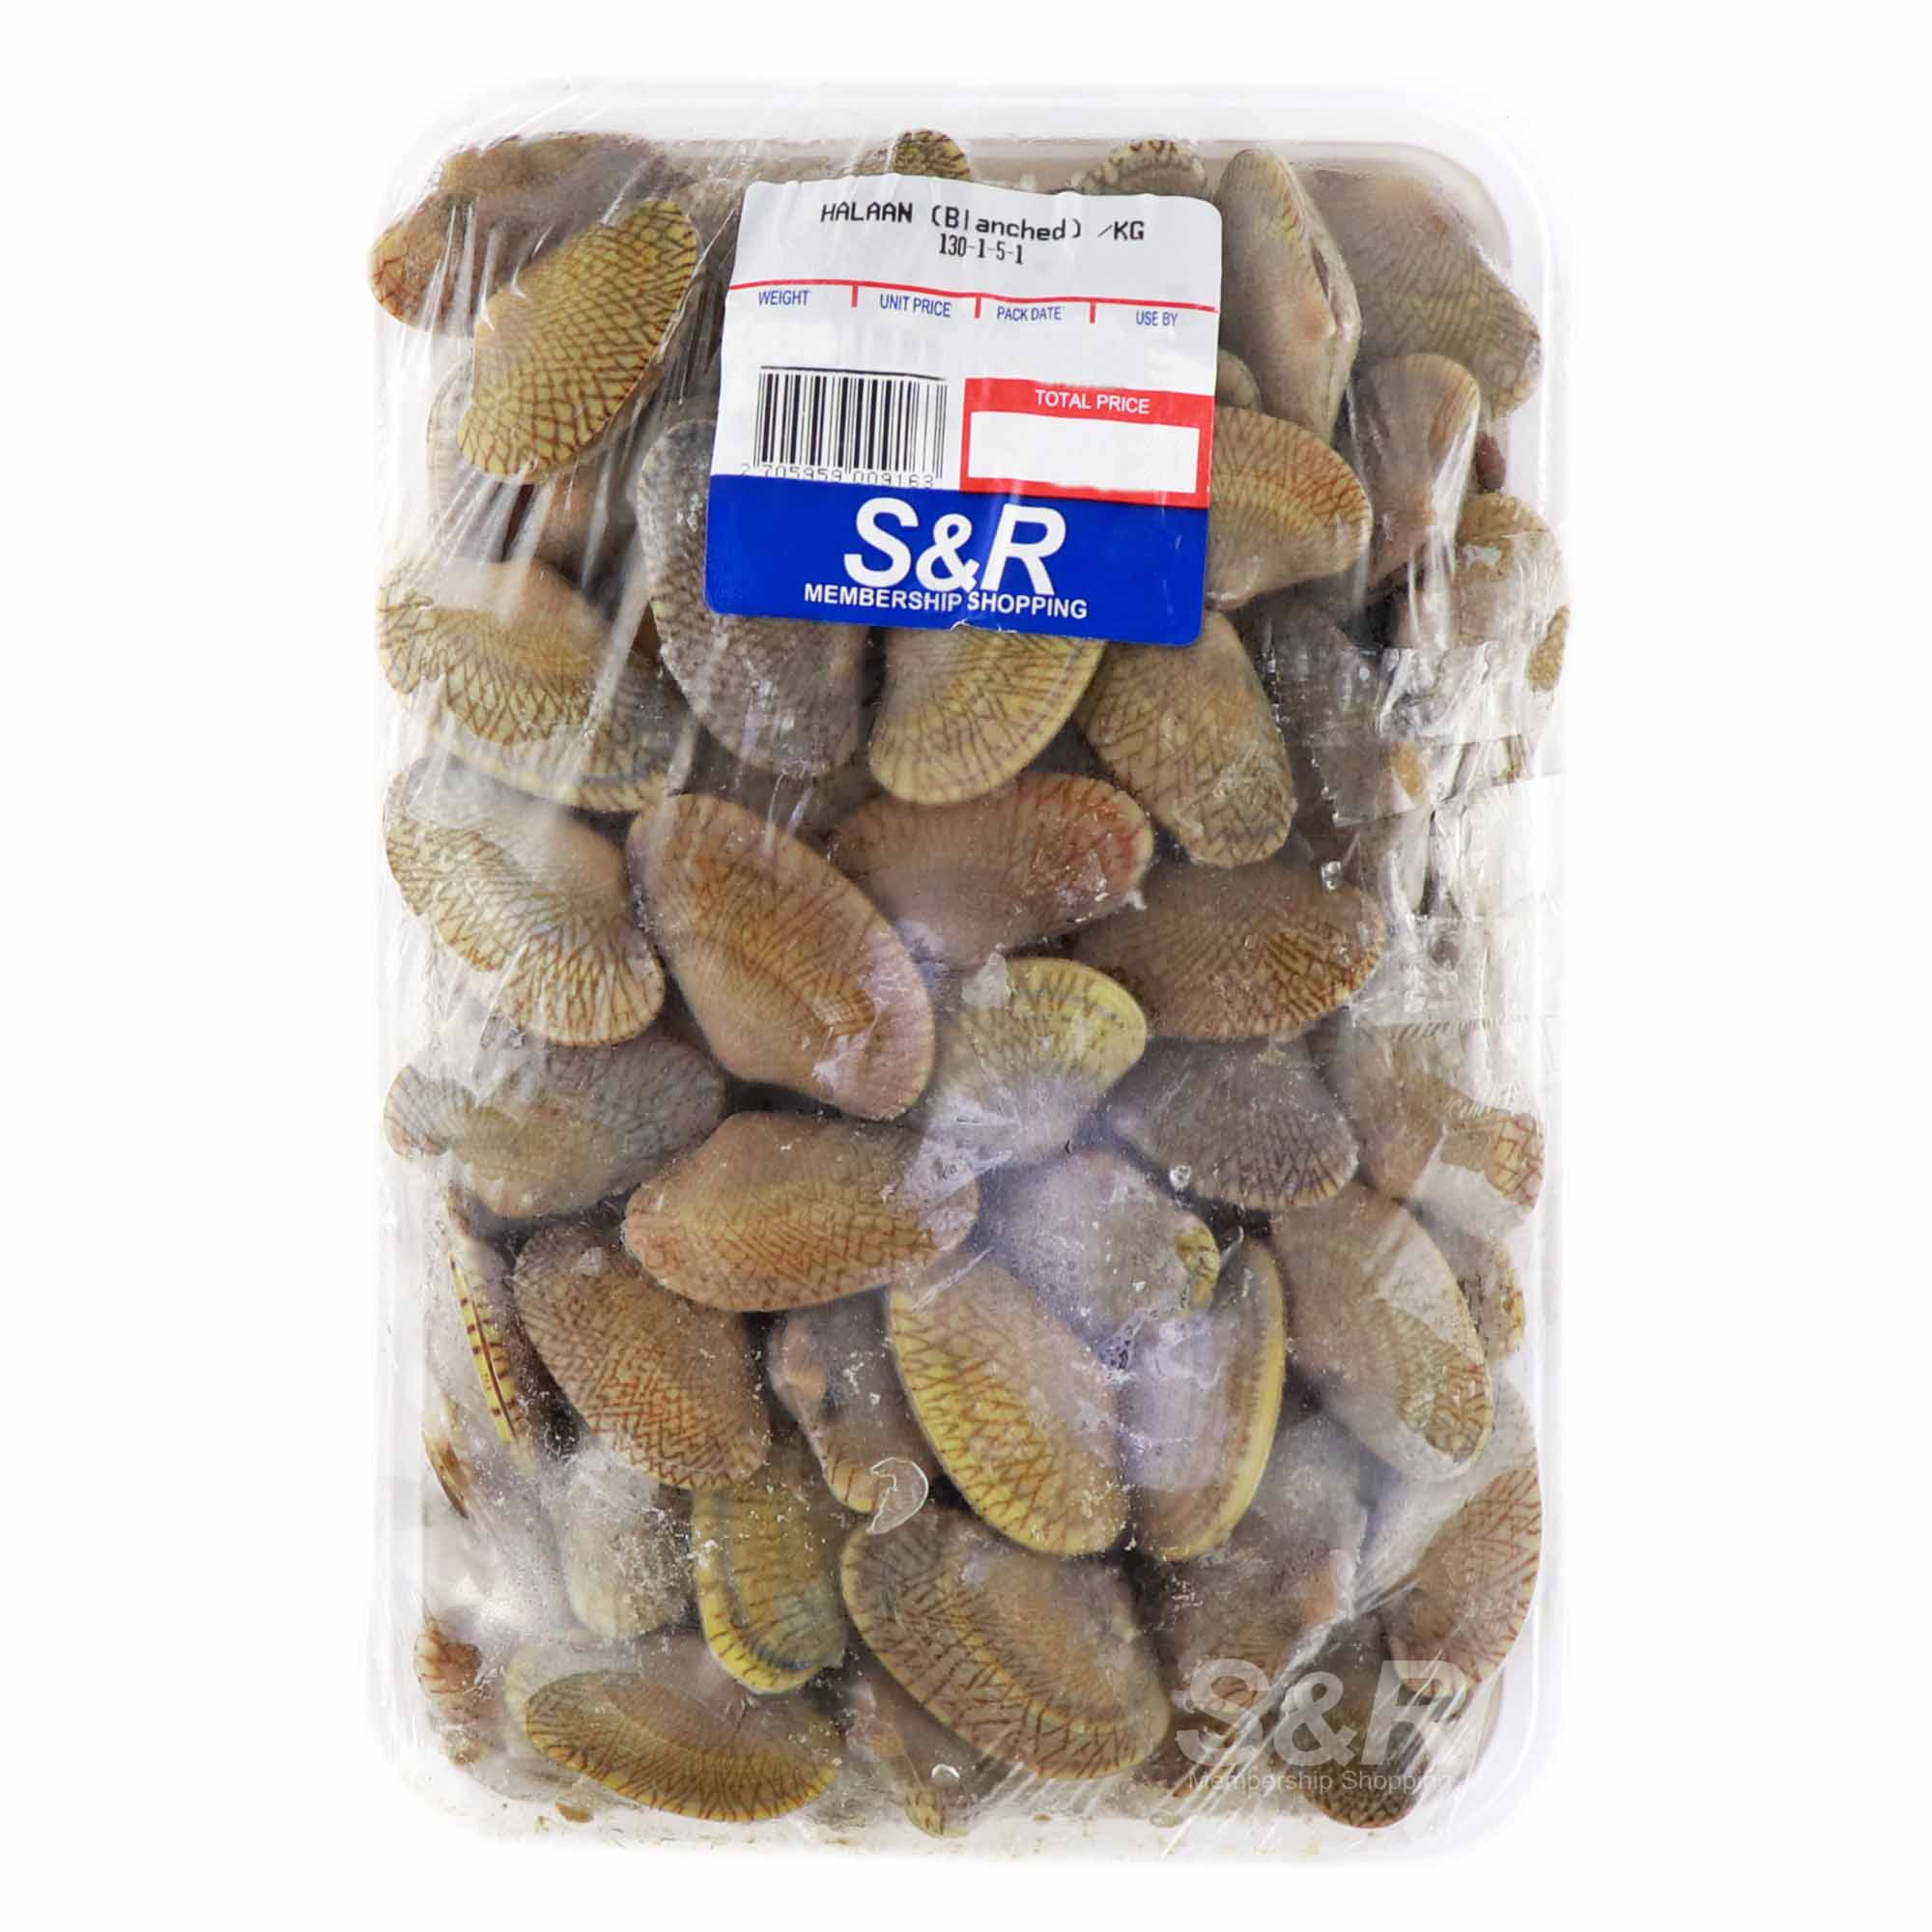 S&R Halaan (Blanched) approx. 1.3Kg